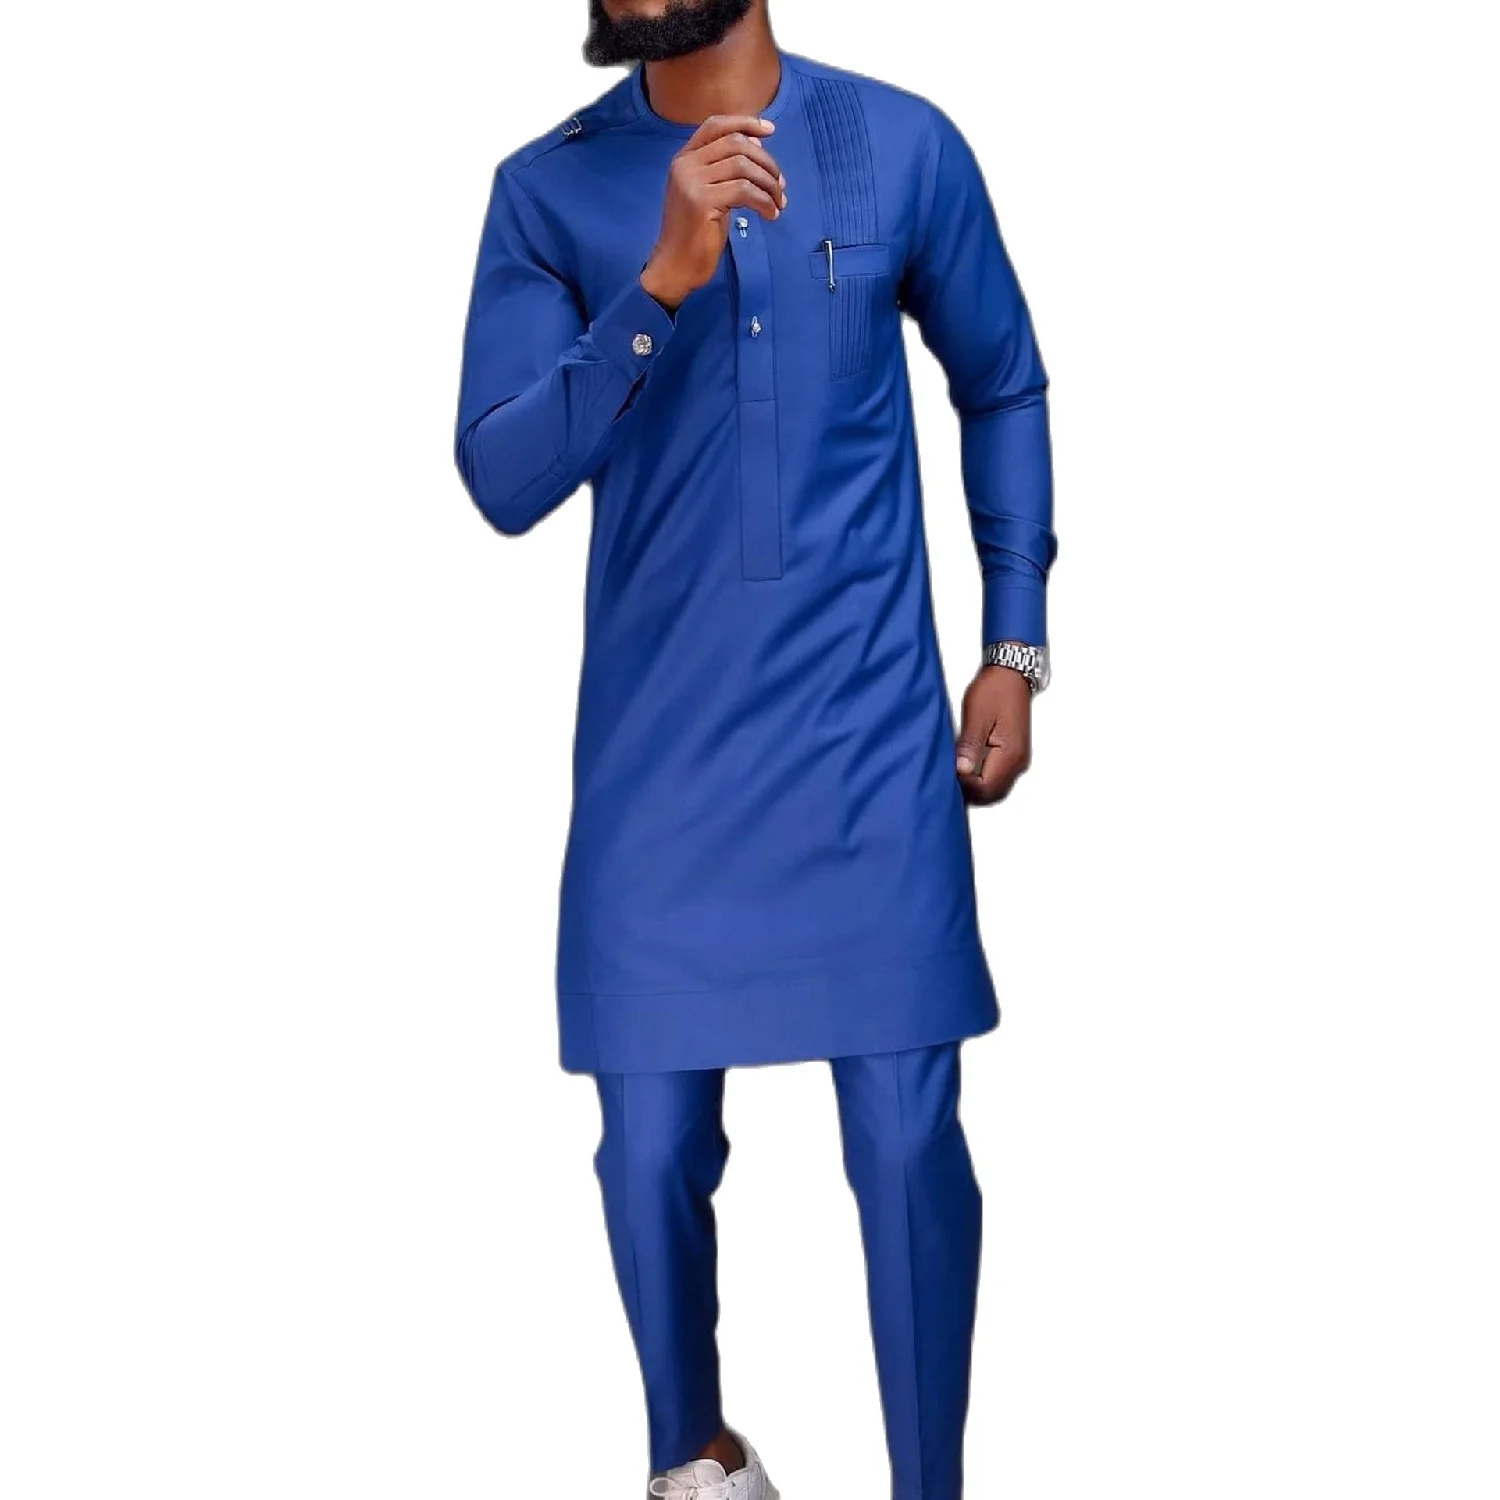 Blue Men's Sets African Wedding Groom Suits Tops+Pants Muslim Fashion Male Festival Outfits